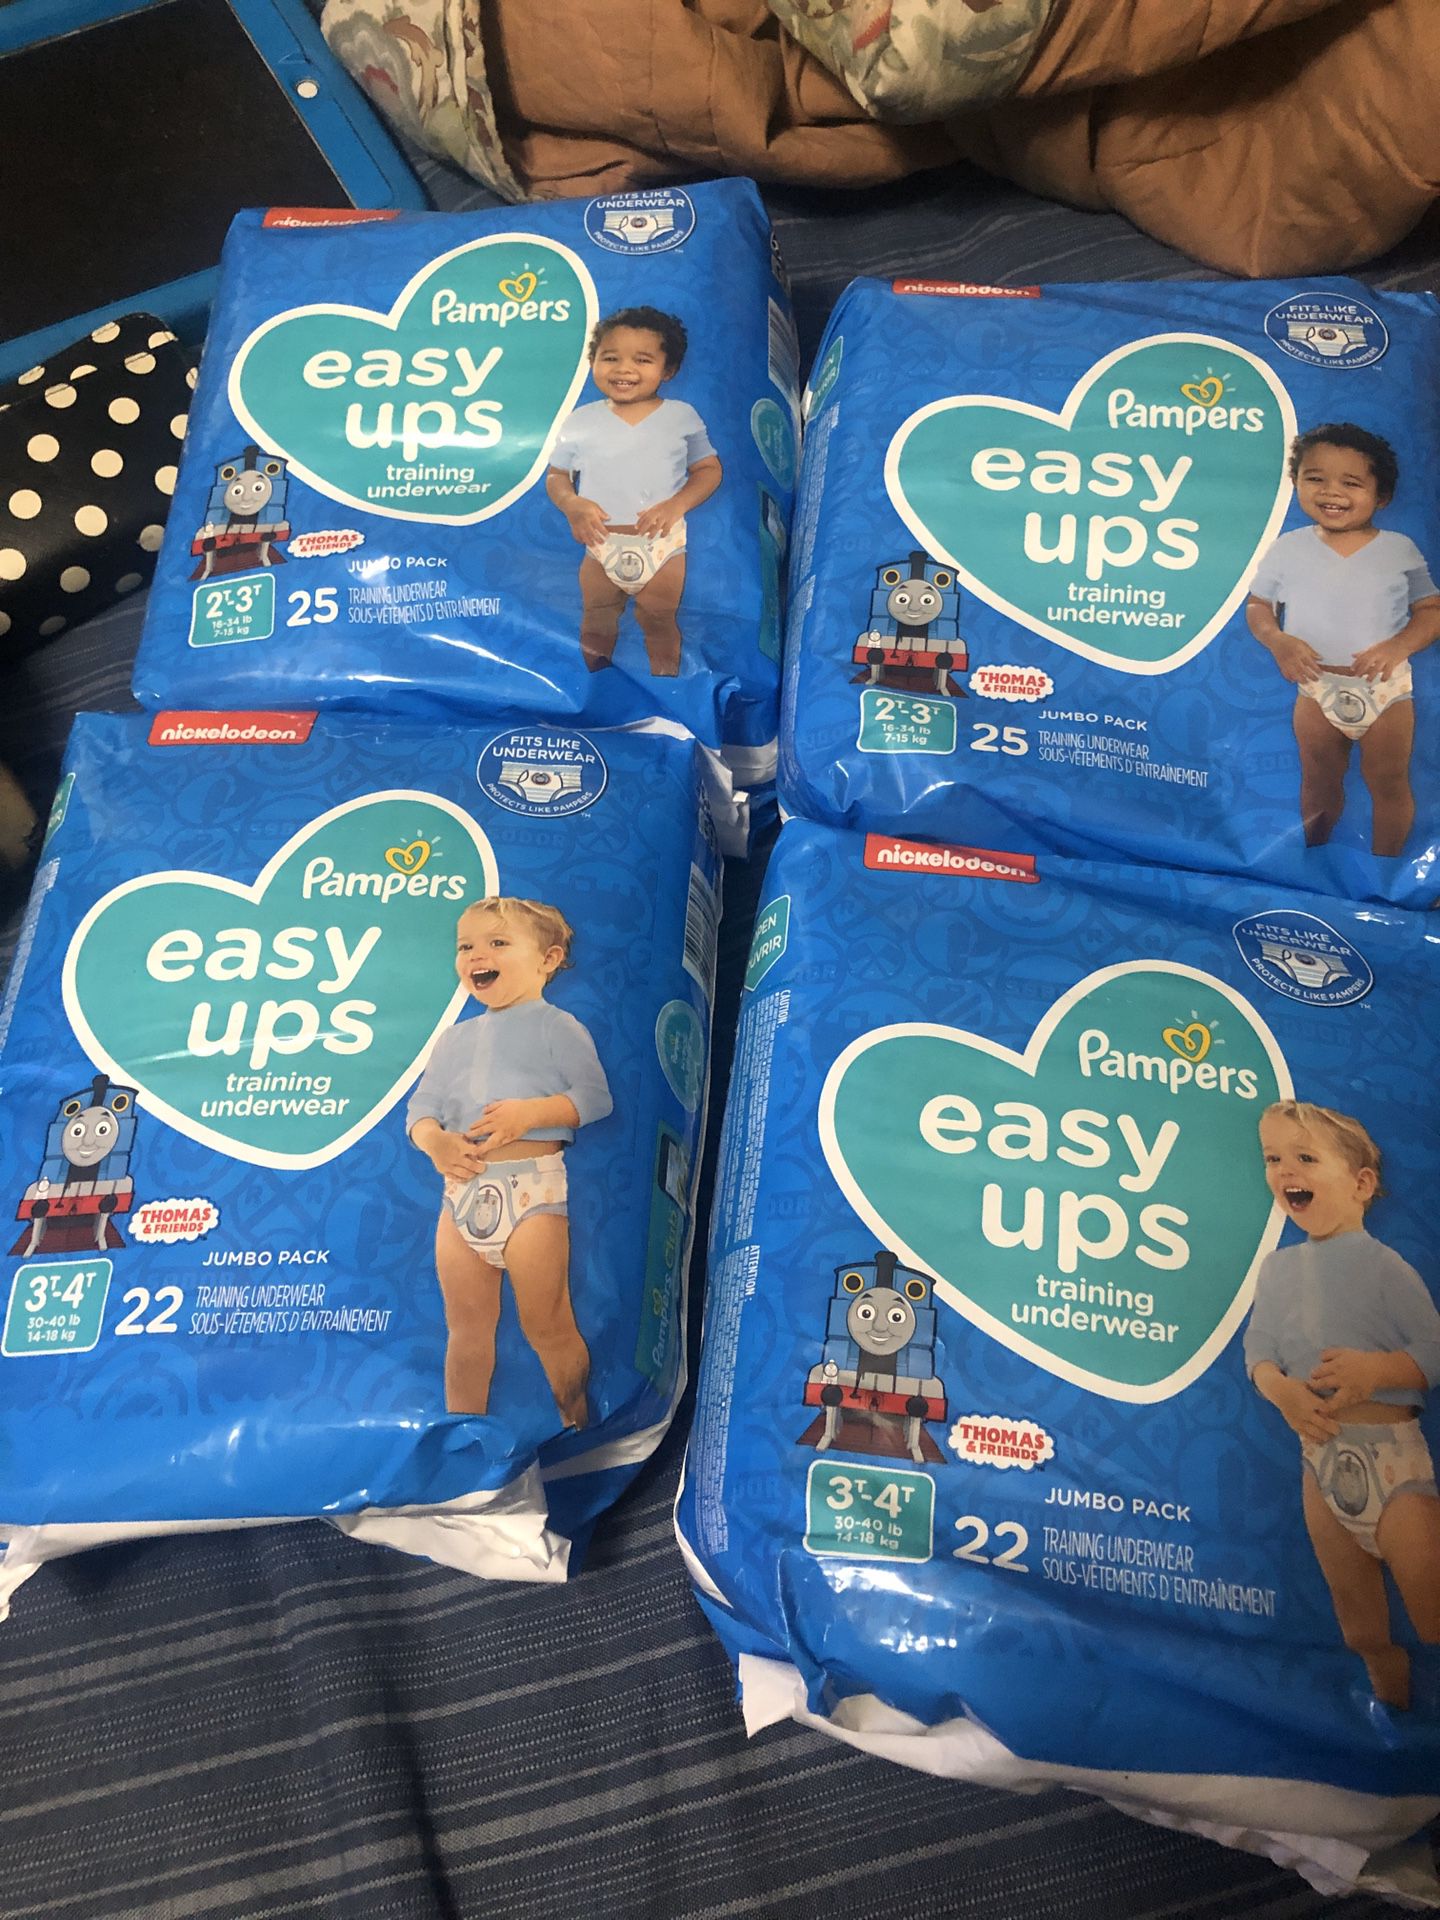 Pampers easy ups $6.50